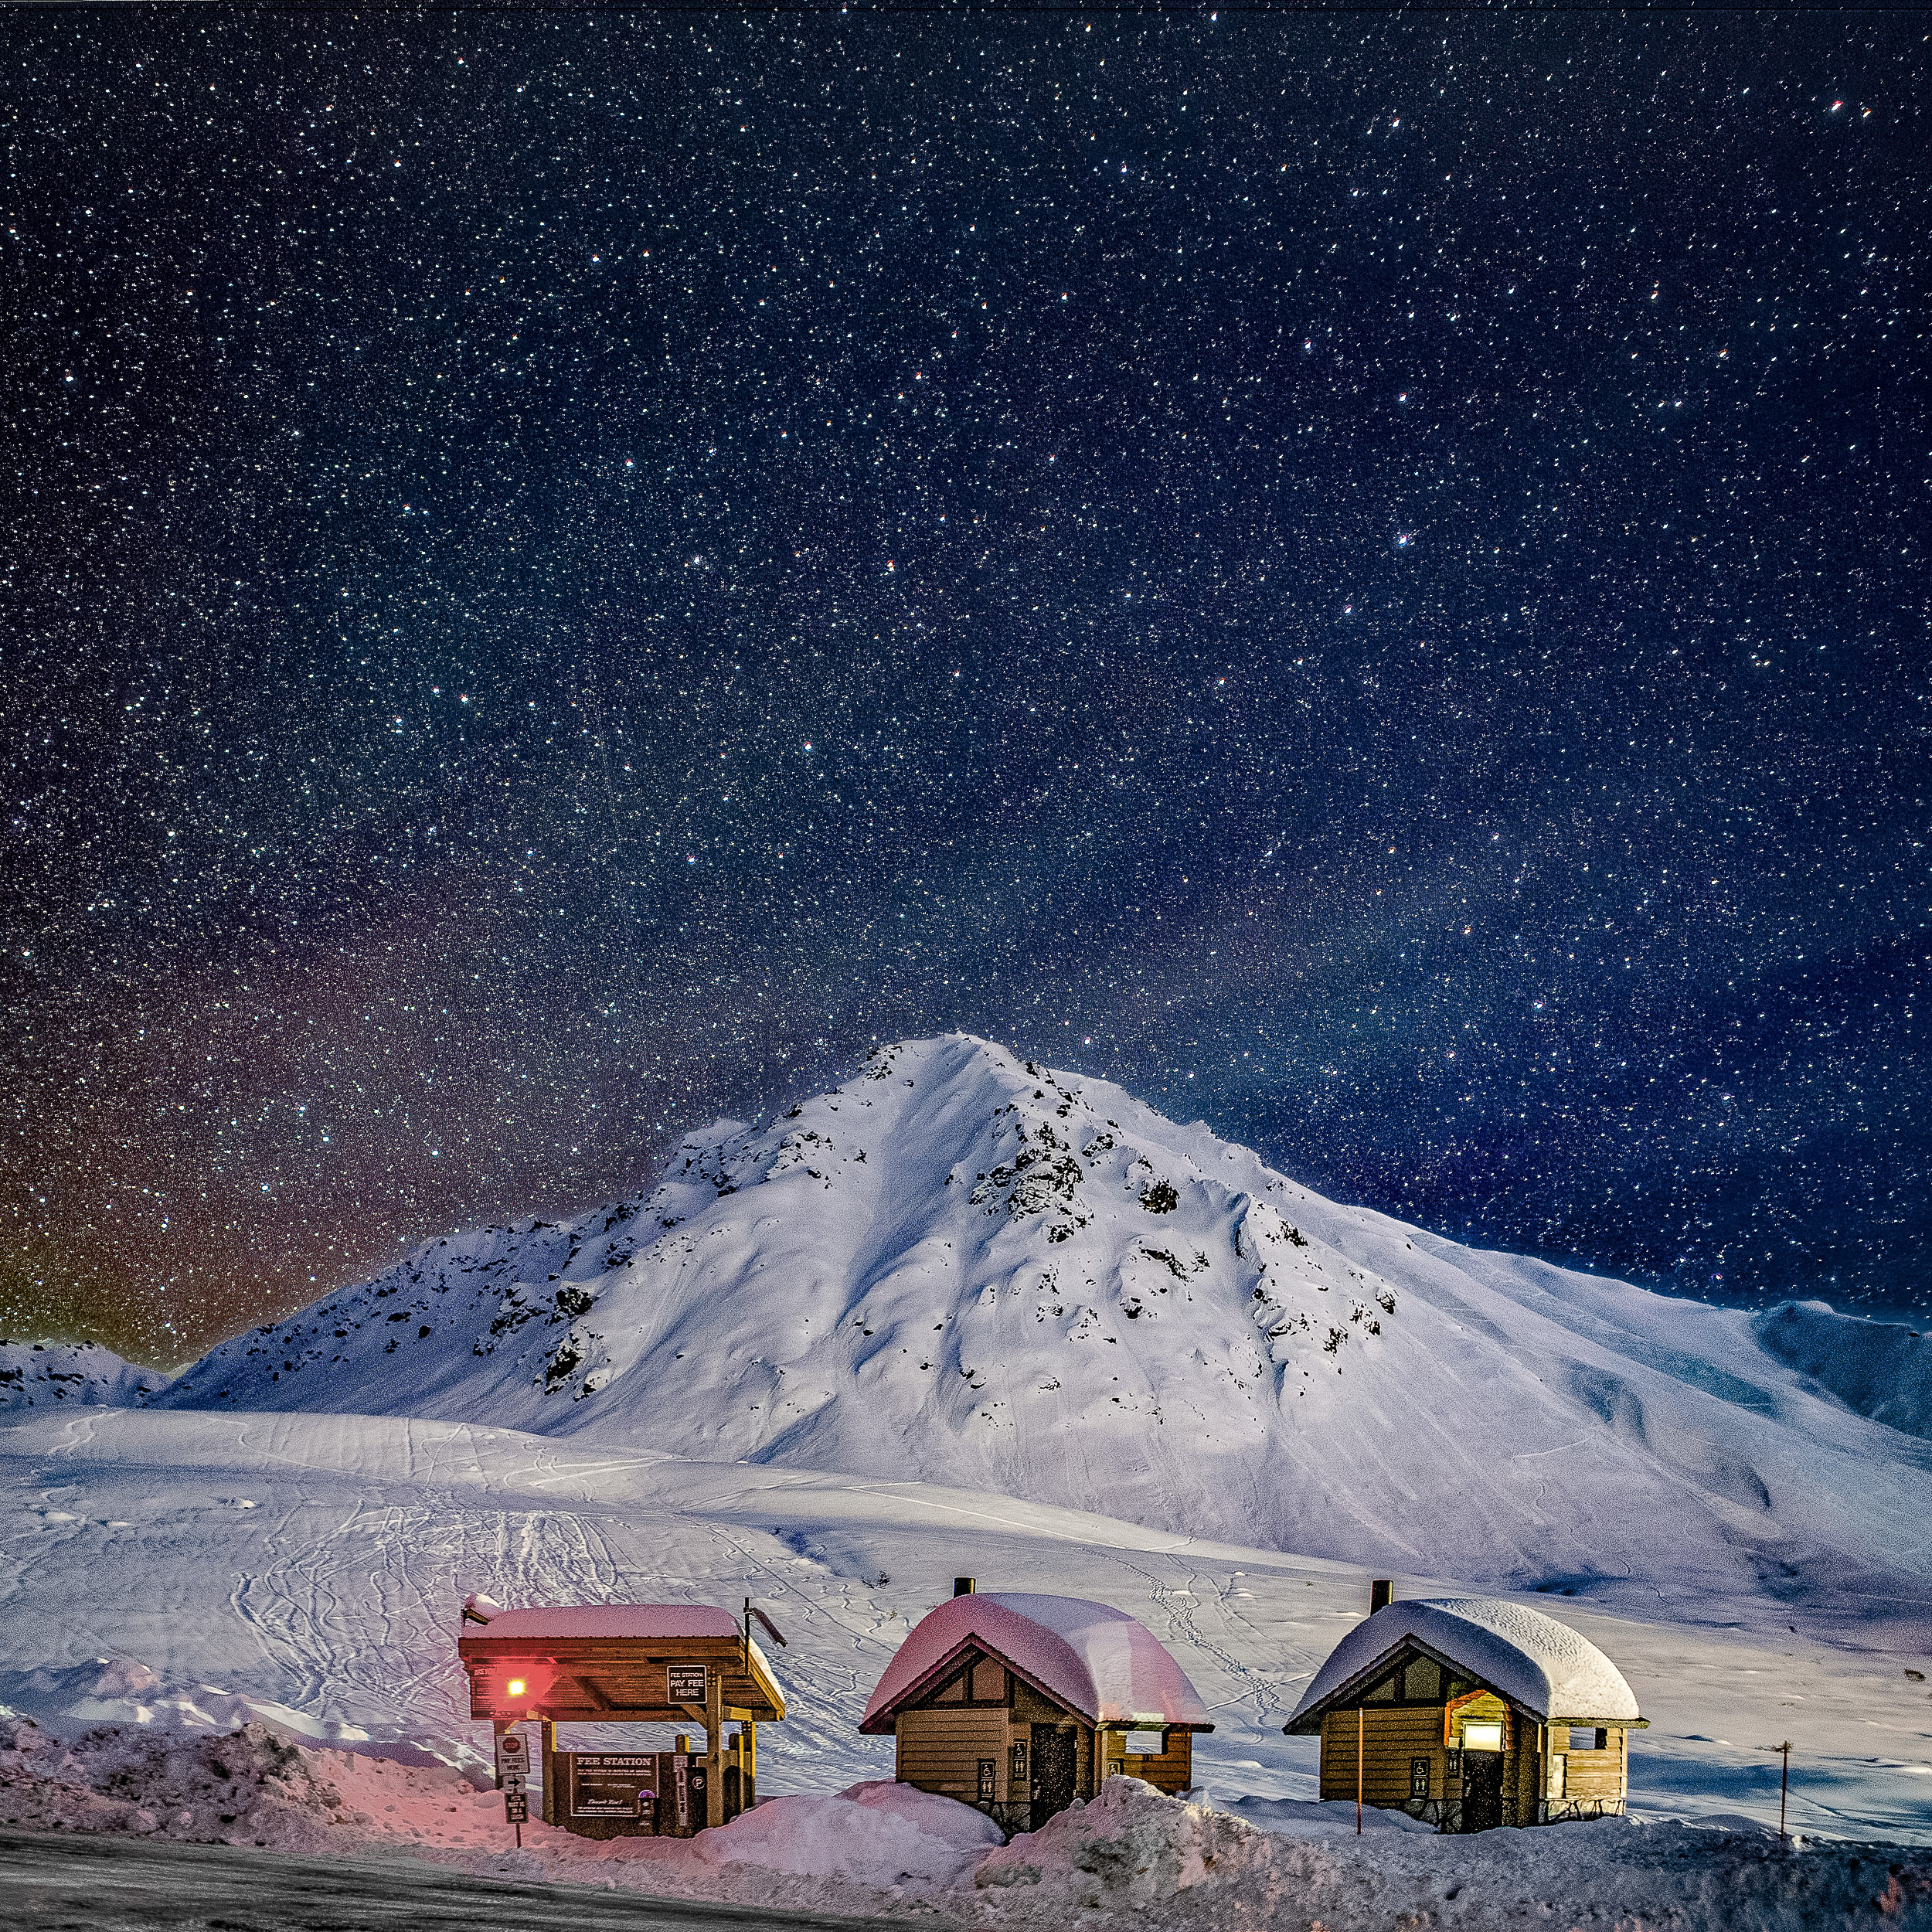 Starry skies and a hint of northern lights blaze over a snowy peak and three little chalets in Hatcher Pass, Alaska.